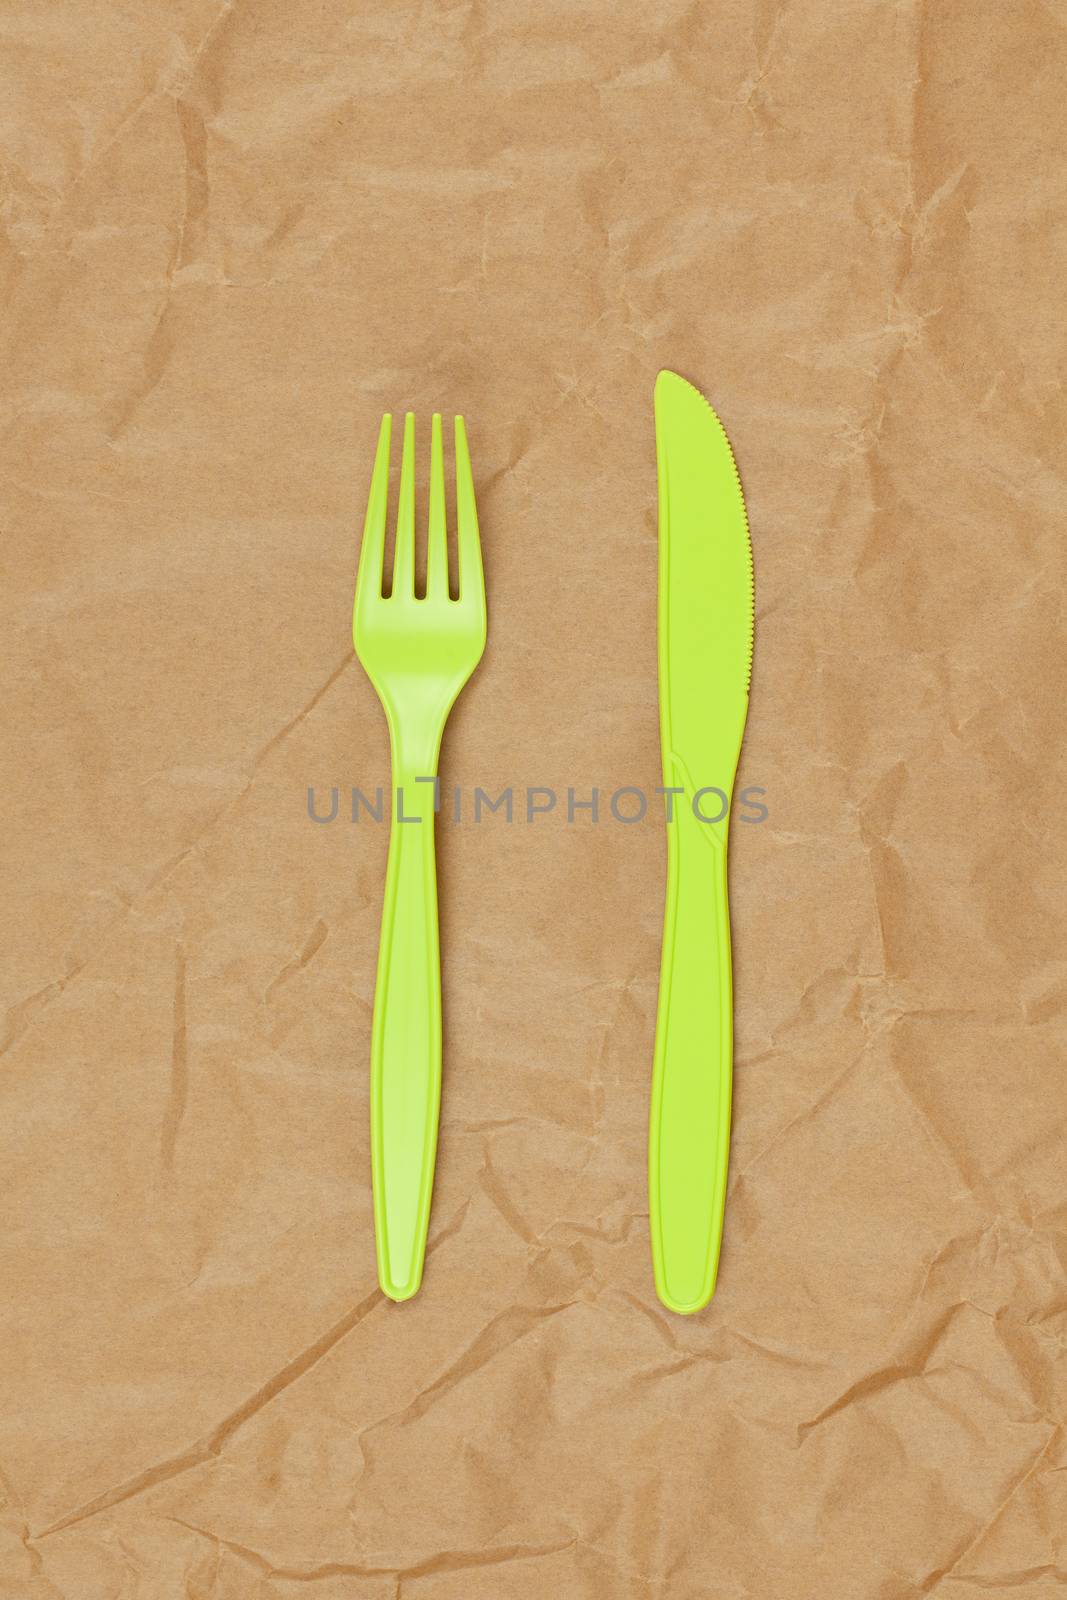 Reusable recyclable green fork, knife made from corn starch on brown crumpled craft paper, copy space. Eco, zero waste, alternative to plastic concept. Flat lay. Vertical. Close-up.